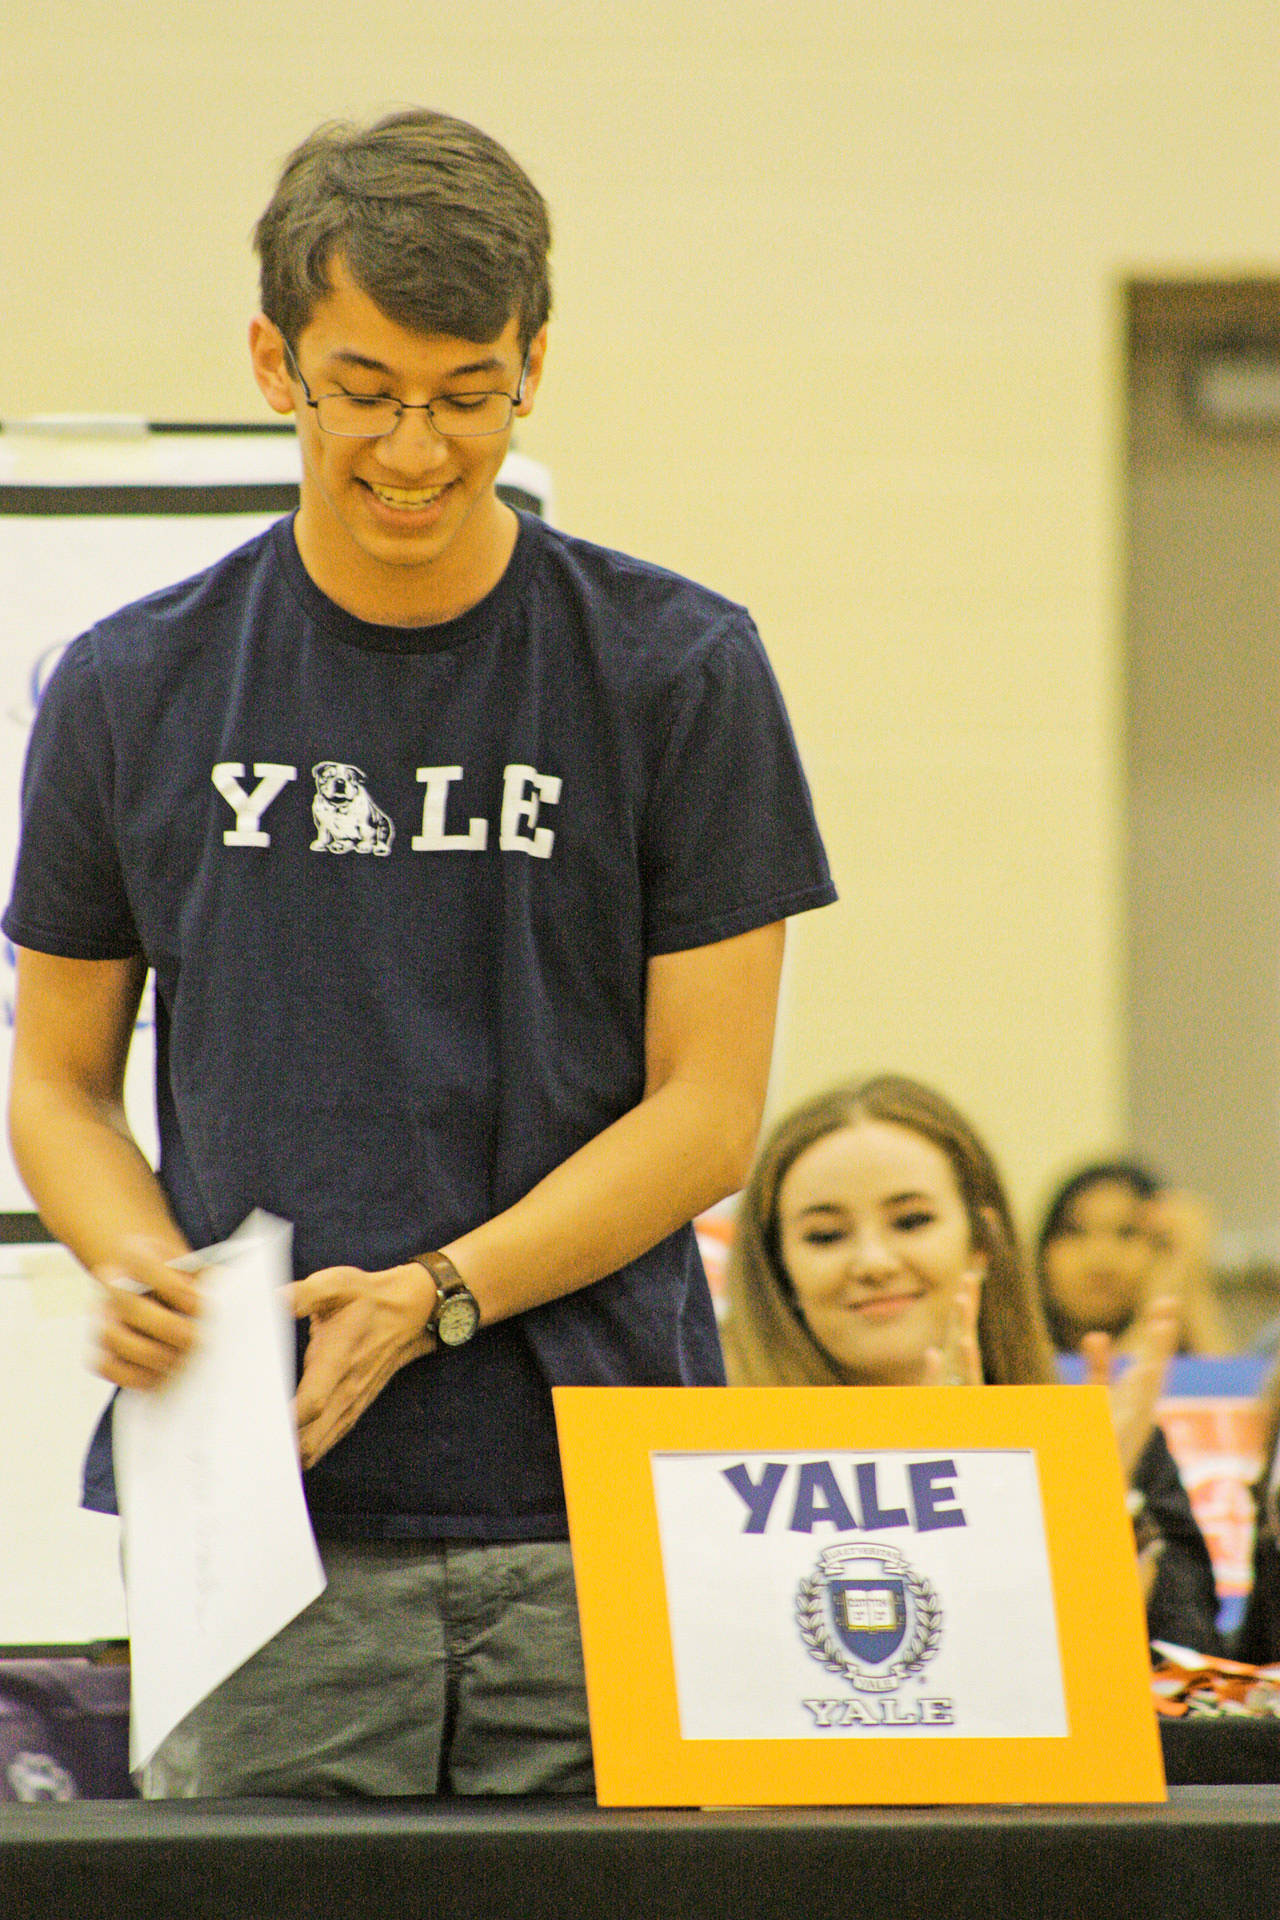 Yale-bound Marty Chandler smiles while receiving a loud ovation from students and faculty during College Signing Day at Auburn Mountainview High School on Monday. MARK KLAAS, Auburn Reporter